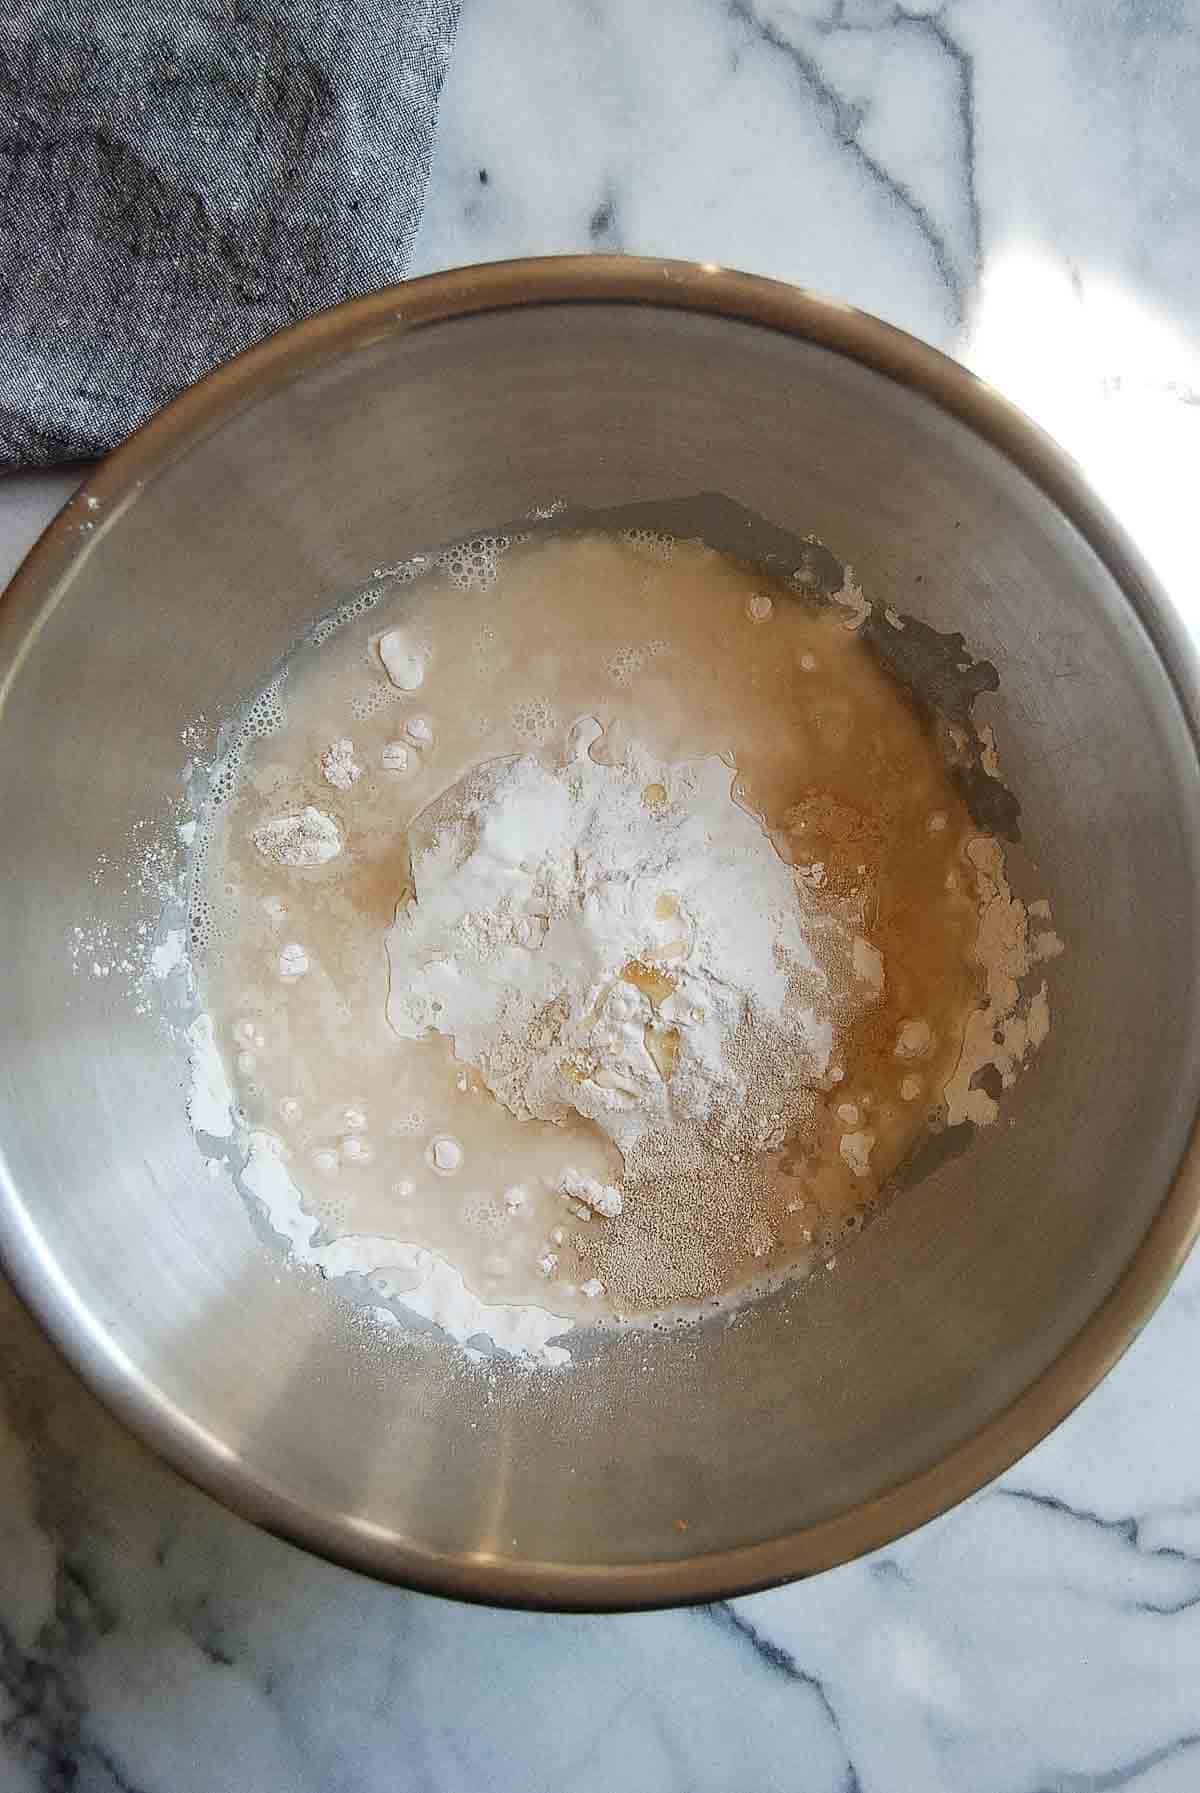 flour, salt water and yeast mixed in a bowl.